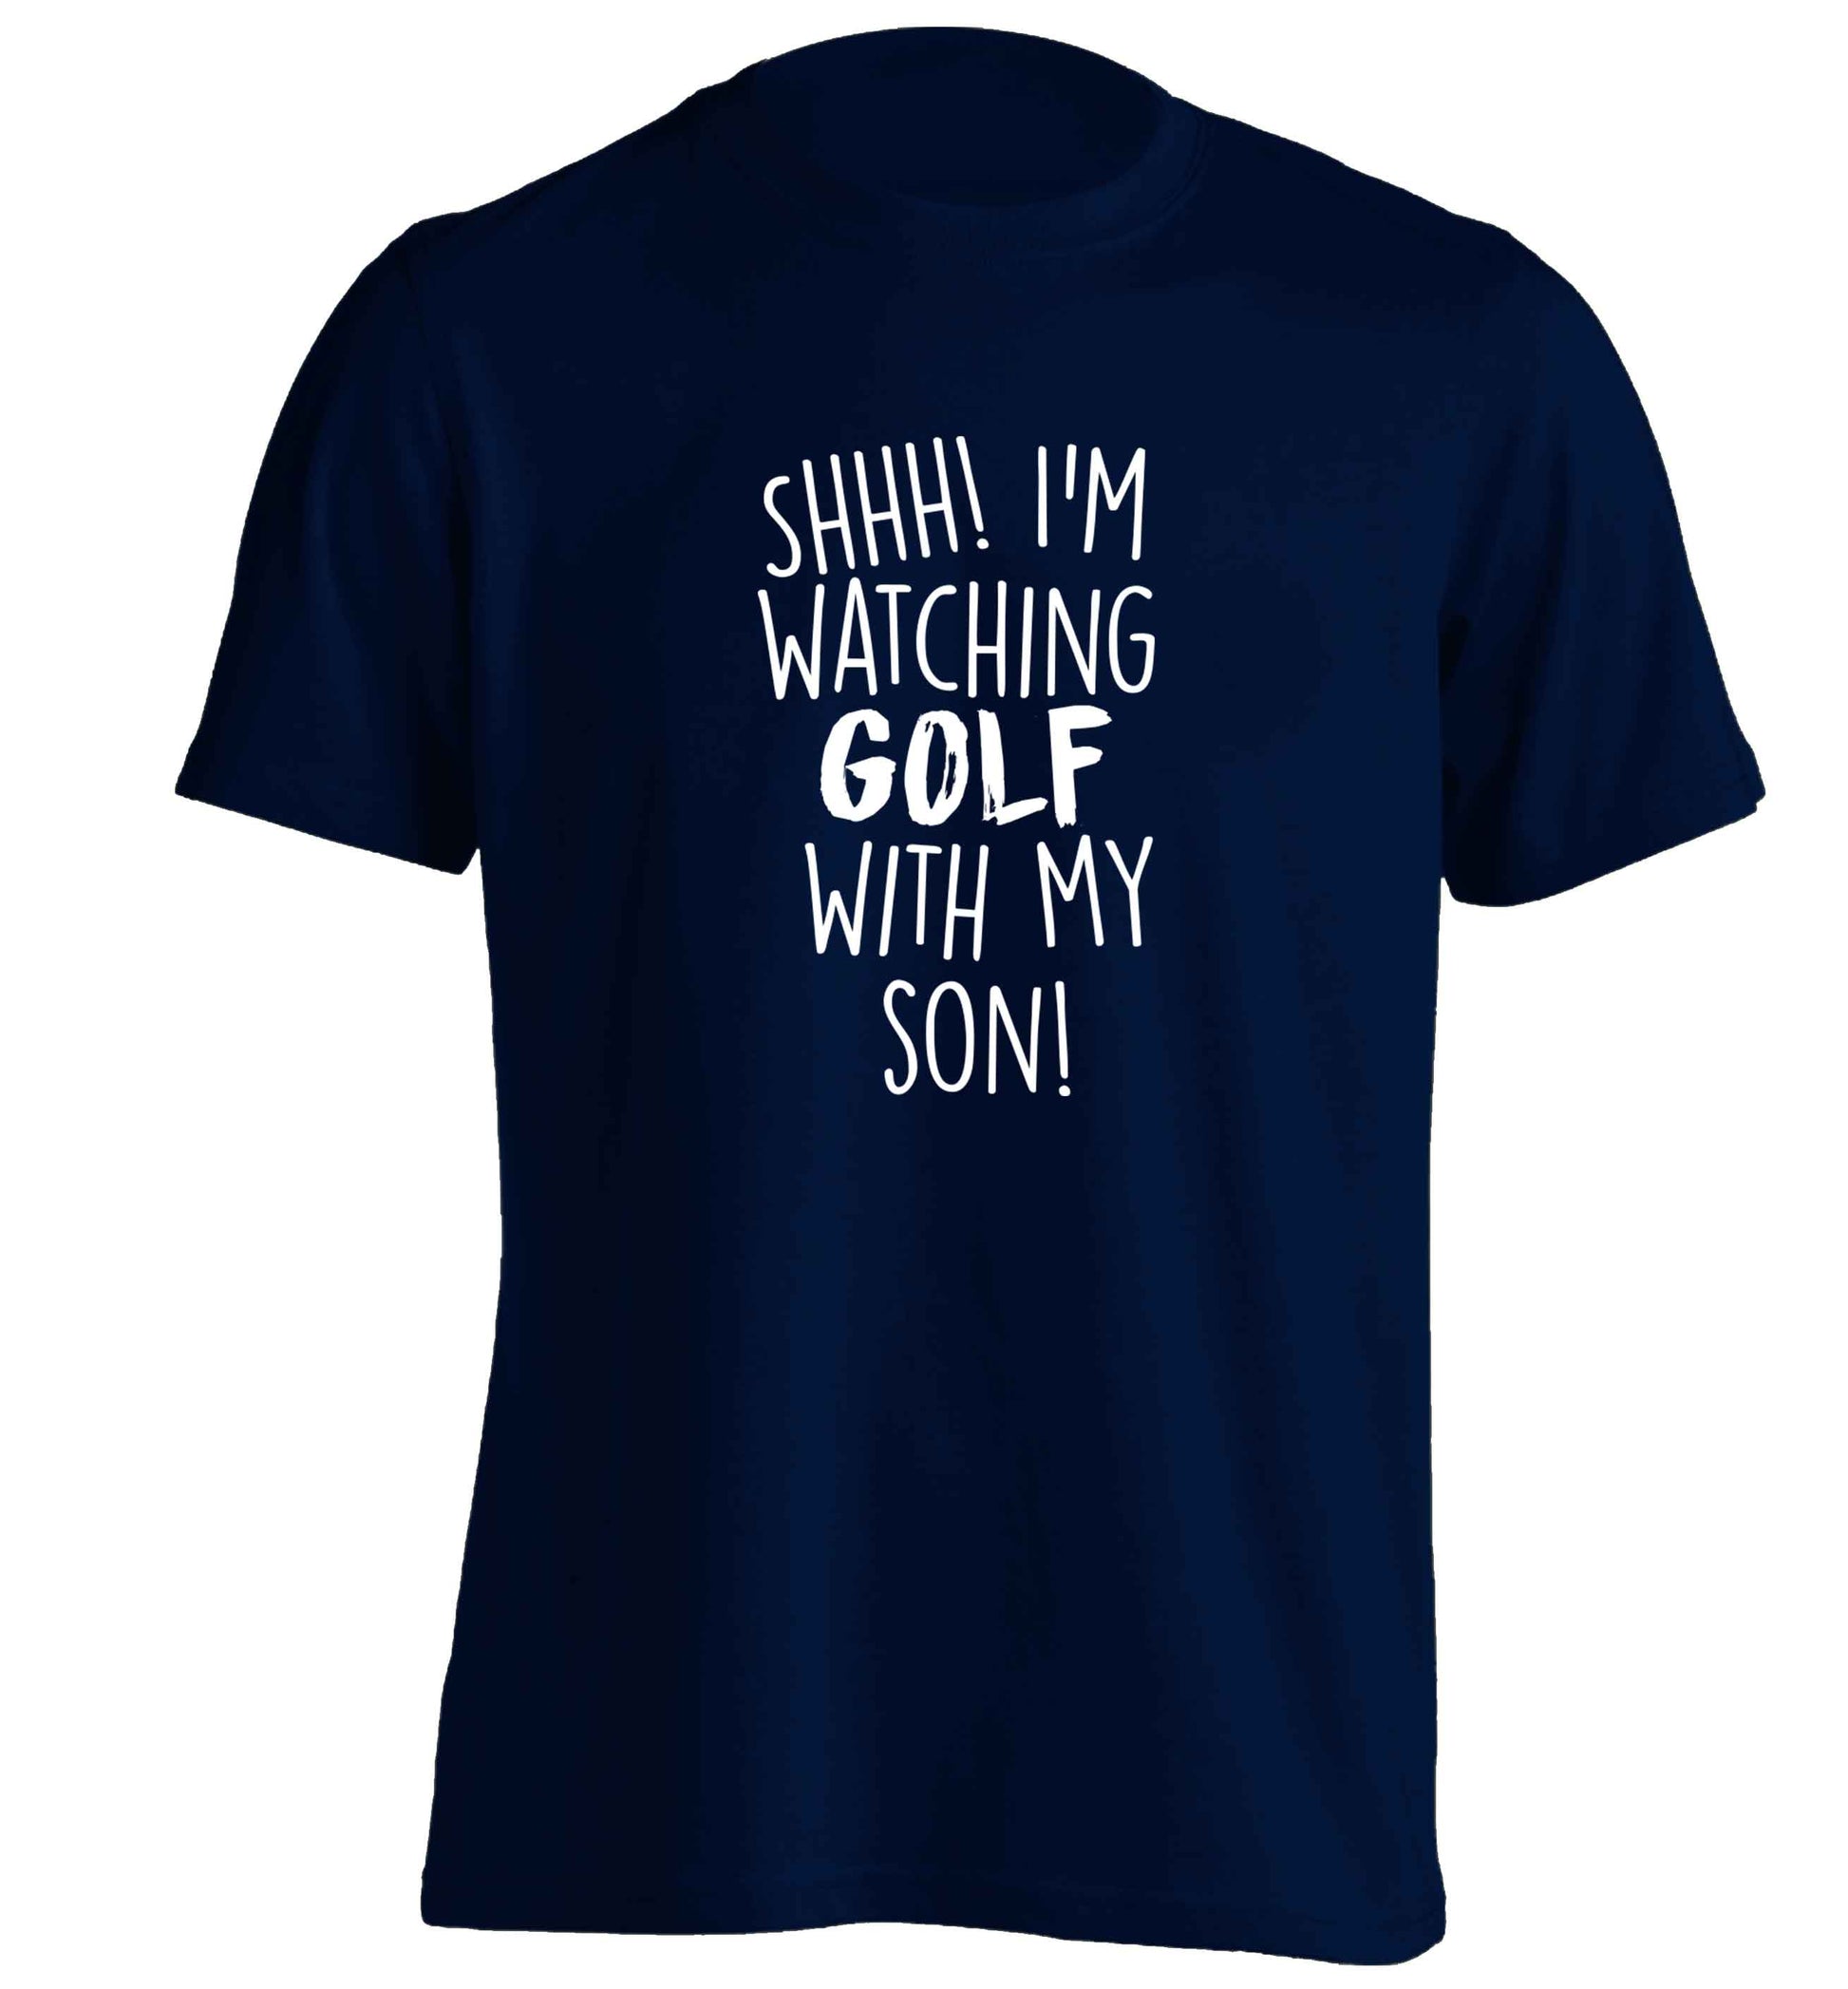 Shh I'm watching golf with my son adults unisex navy Tshirt 2XL